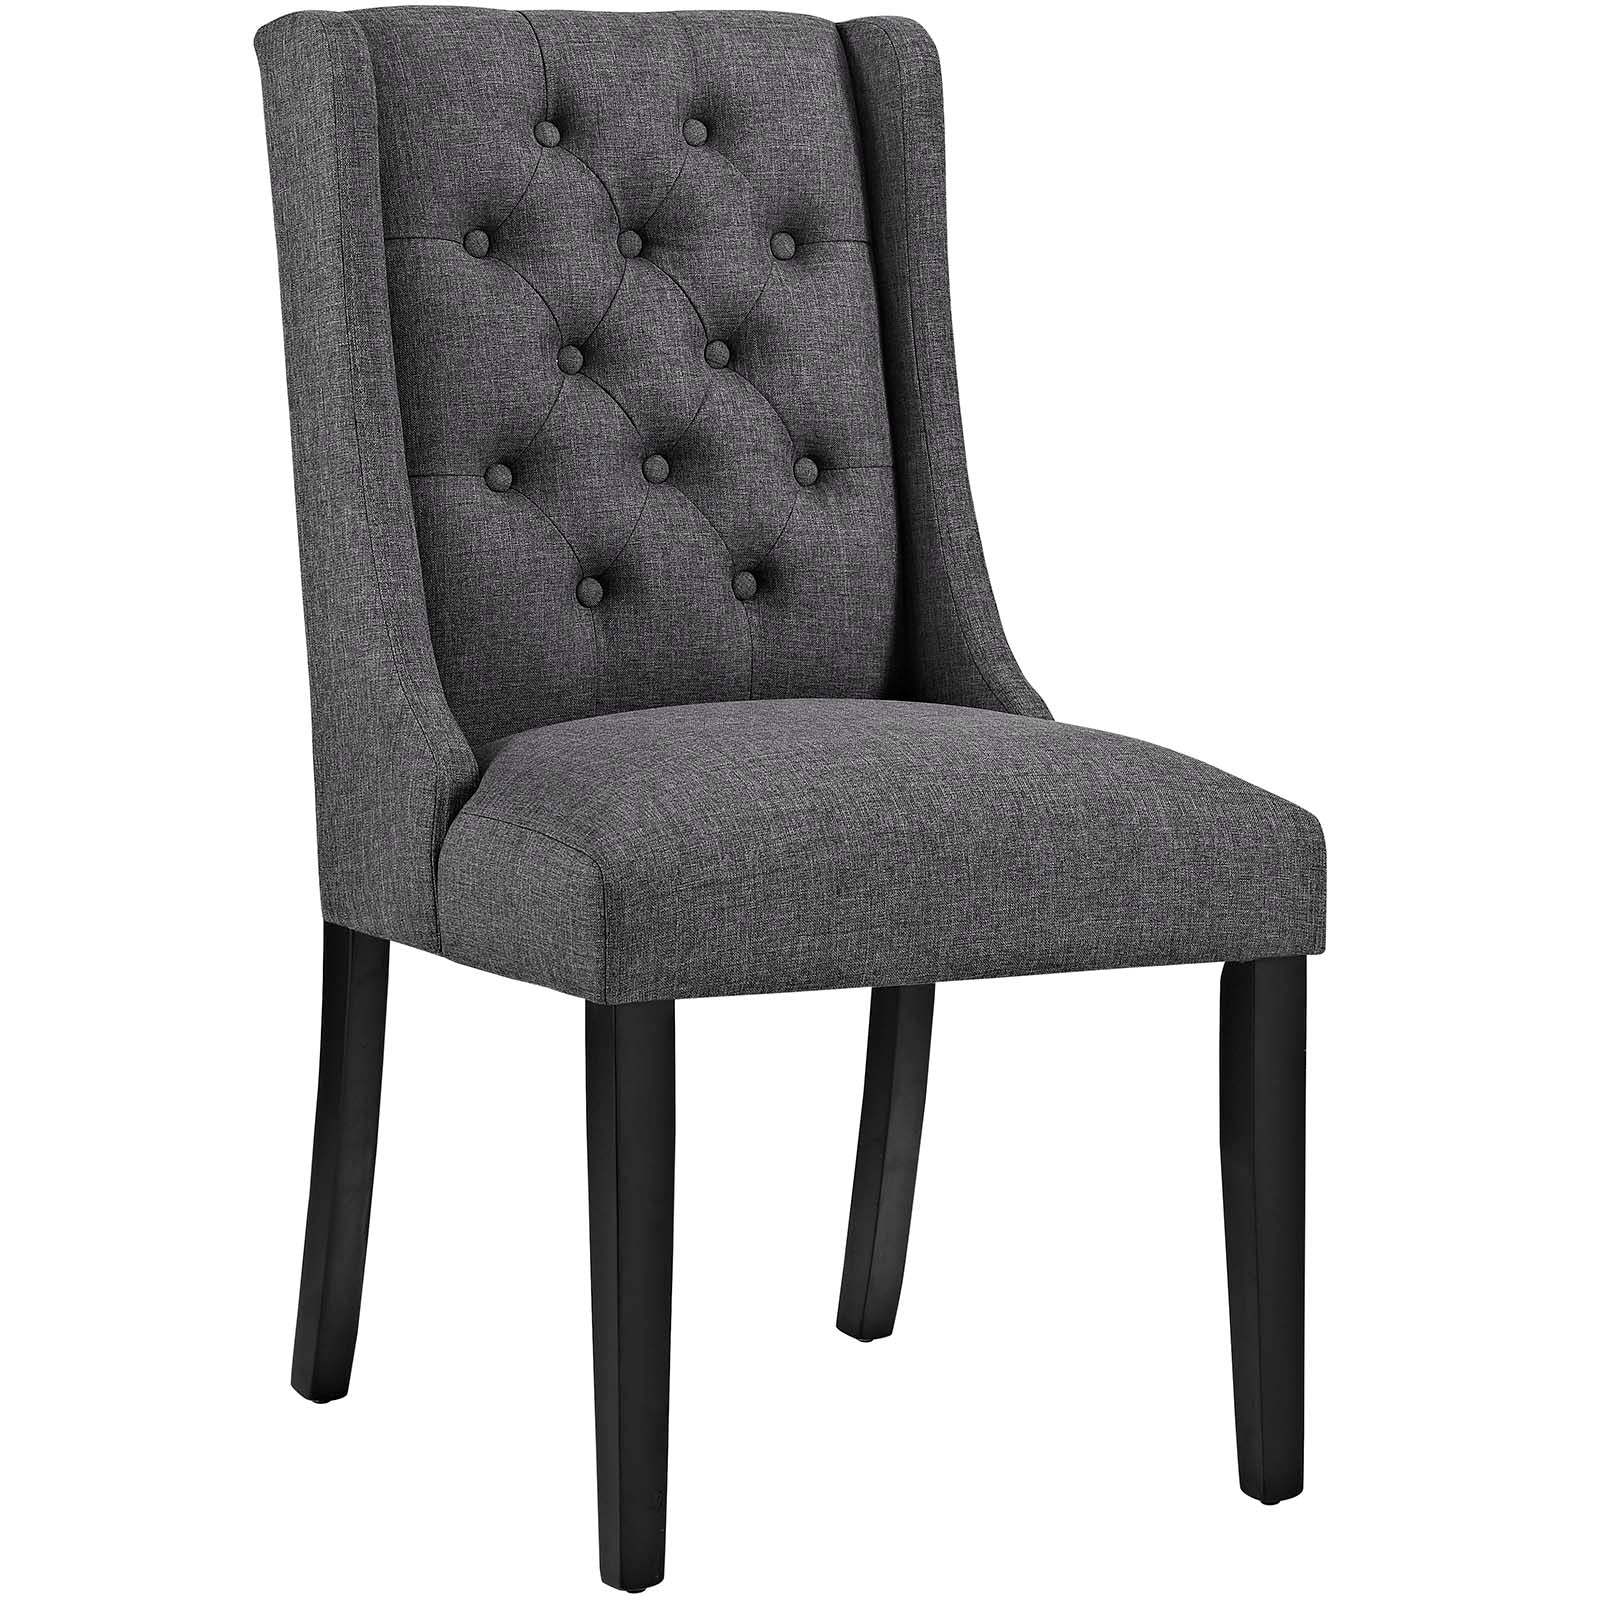 Modway Dining Chairs - Baronet Dining Chair Fabric Gray (Set of 4)